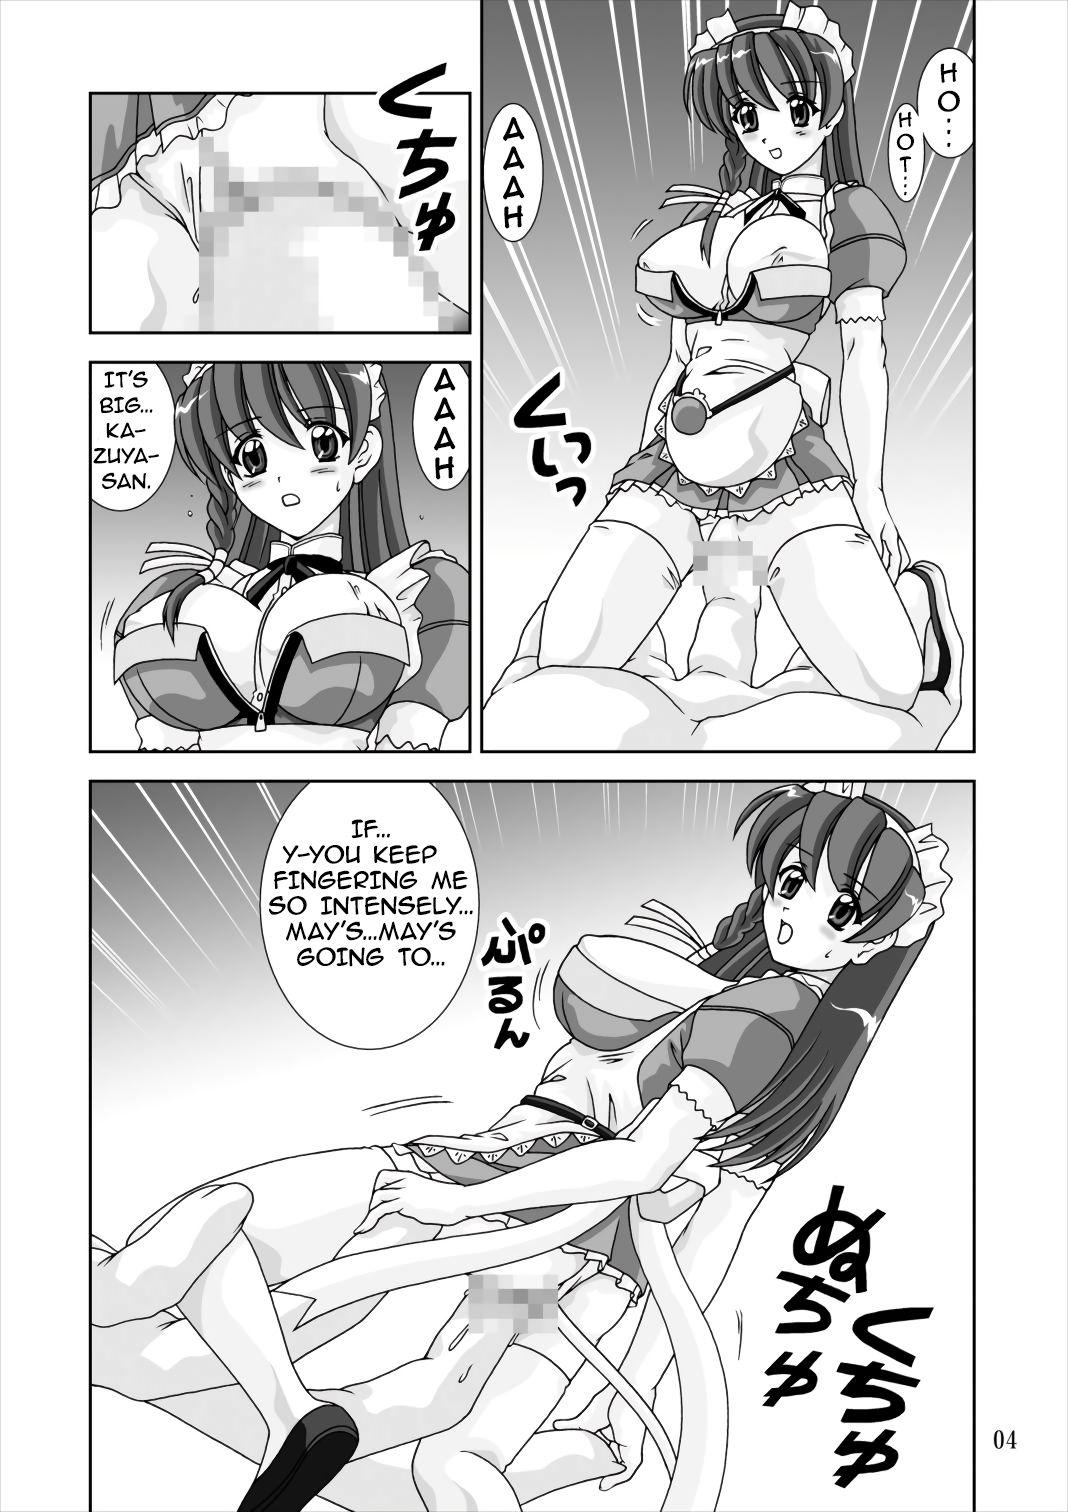 Swinger Shiboritate | May I Offer a Squeeze? - Hand maid may Blow Job - Page 4